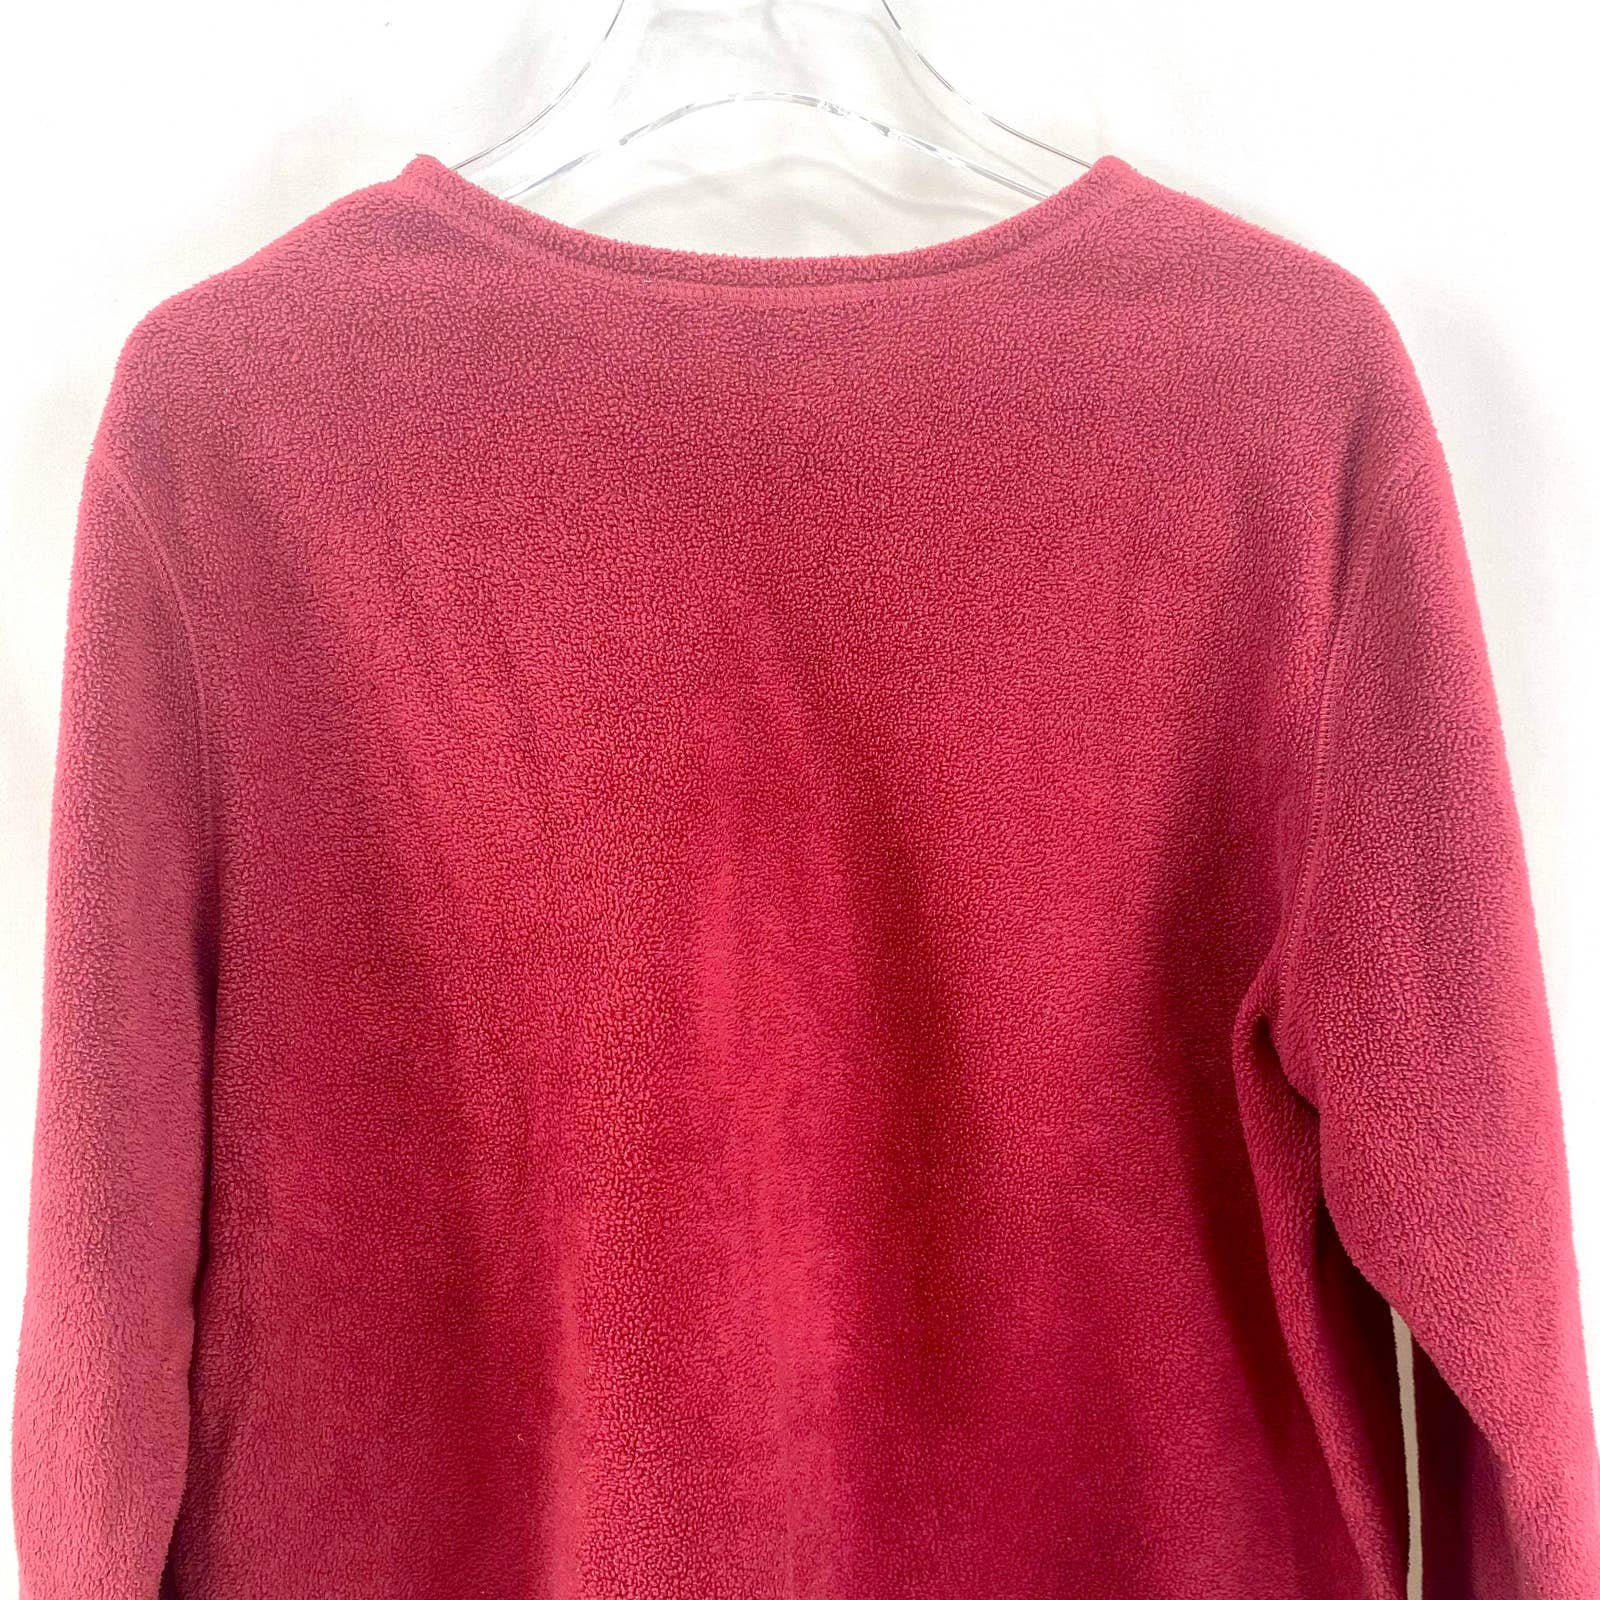 Popular CROFT & BARROW Red Zip Up Sweater with Snowflake Design fghhamHzY well sale